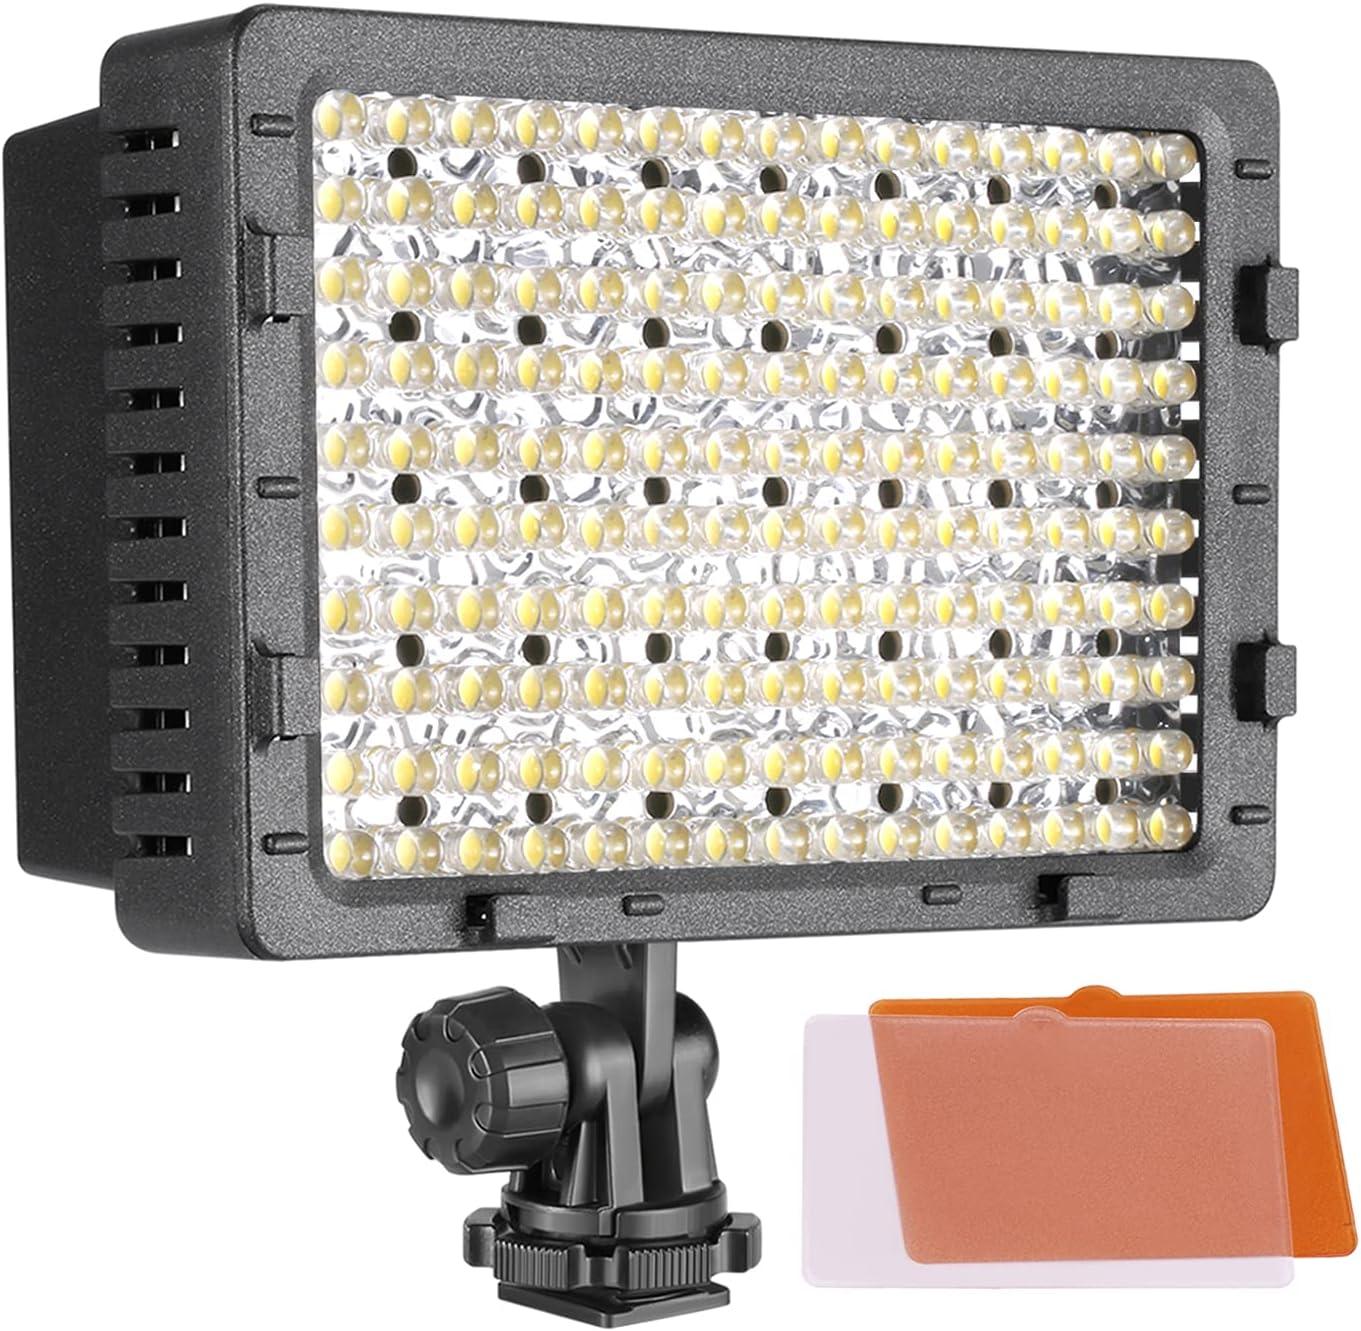 NEEWER 160 LED CN-160 Dimmable Ultra High Power Panel Digital Camera /  Camcorder Video Light, LED Light compatible with Canon, Nikon, Pentax,  Panasonic,SONY, Samsung and Olympus Digital SLR Cameras Standard Packaging